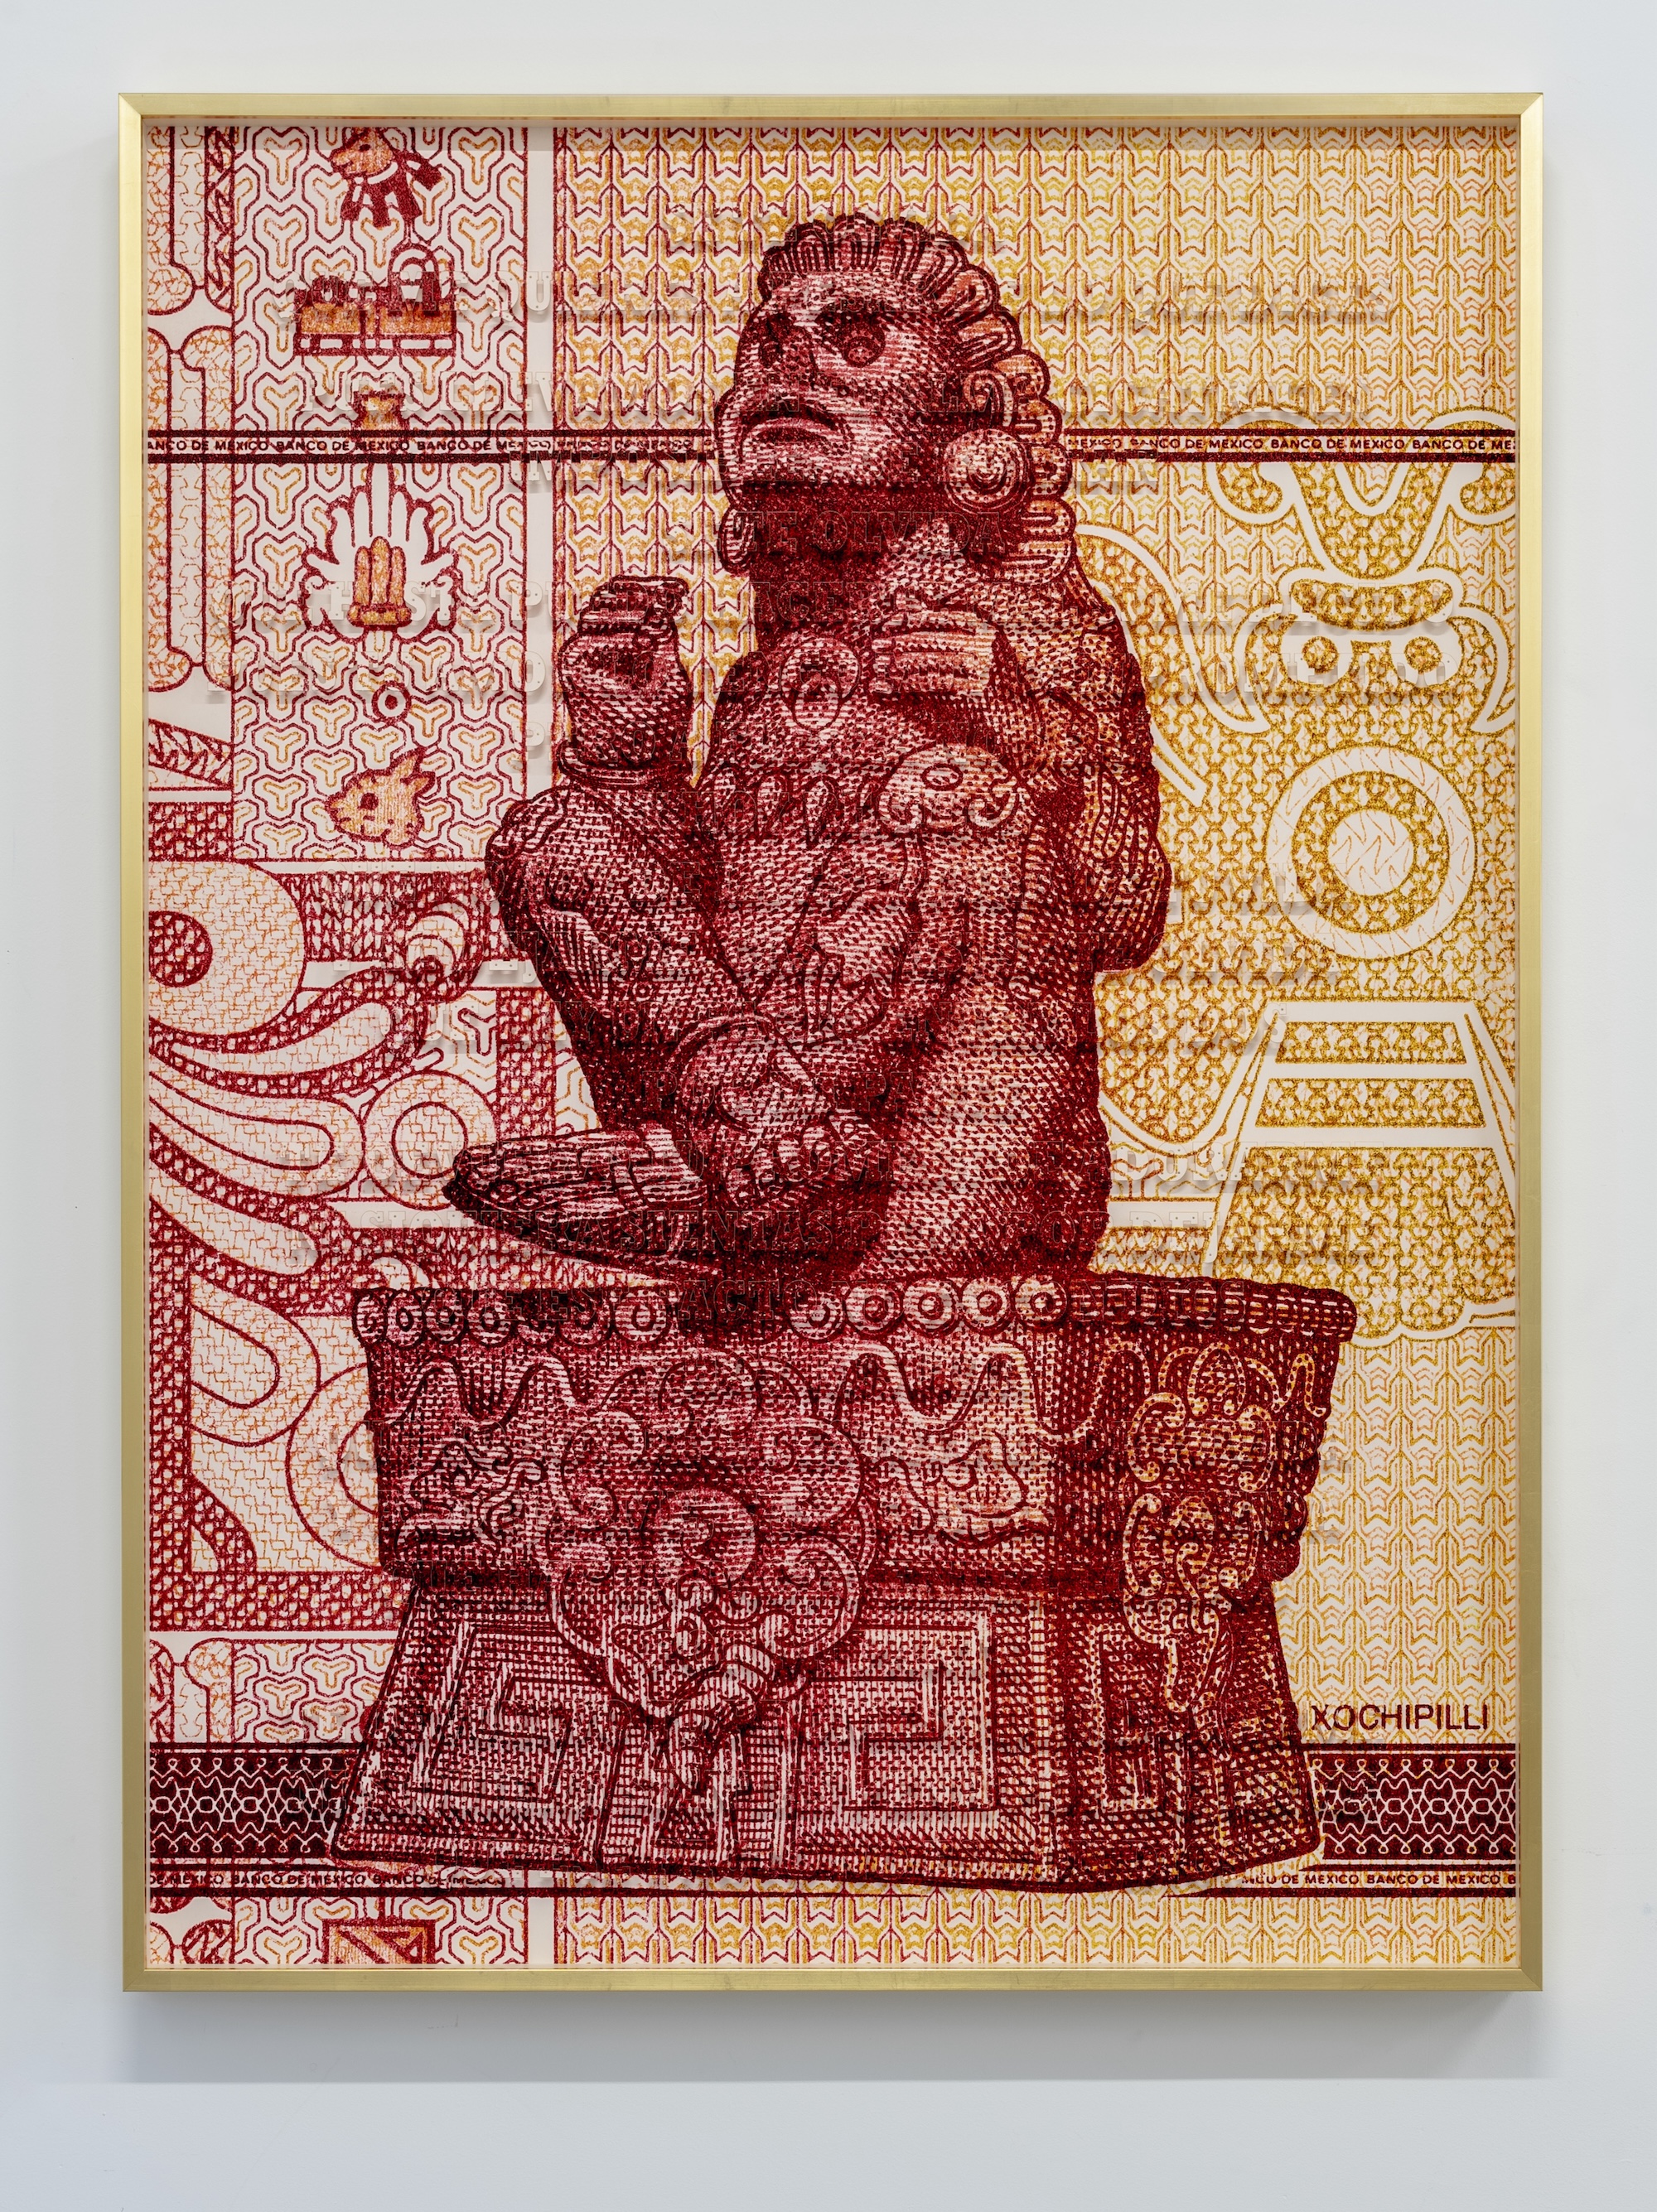 La Mentira, From Love Song For Time Of Crisis series (Mexico Banknote)